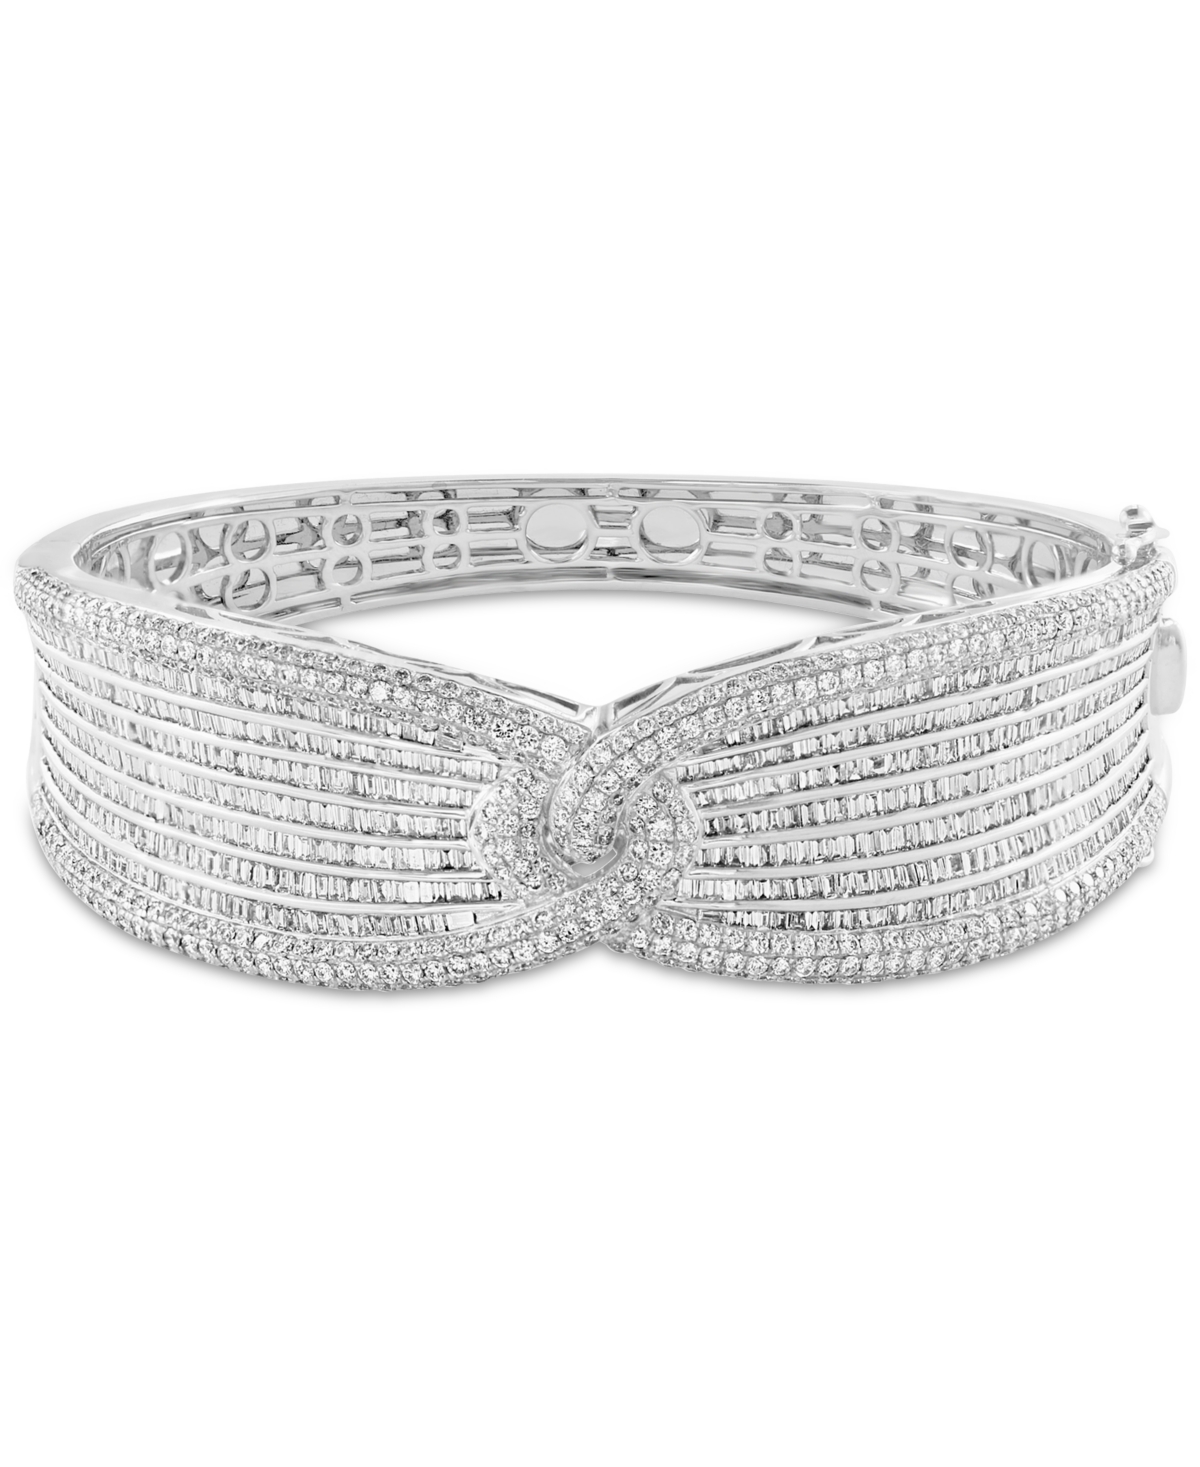 Effy Collection Effy Limited Edition Diamond Round & Baguette Statement Bracelet (6-1/10 Ct. T.w.) In 14k White Gold